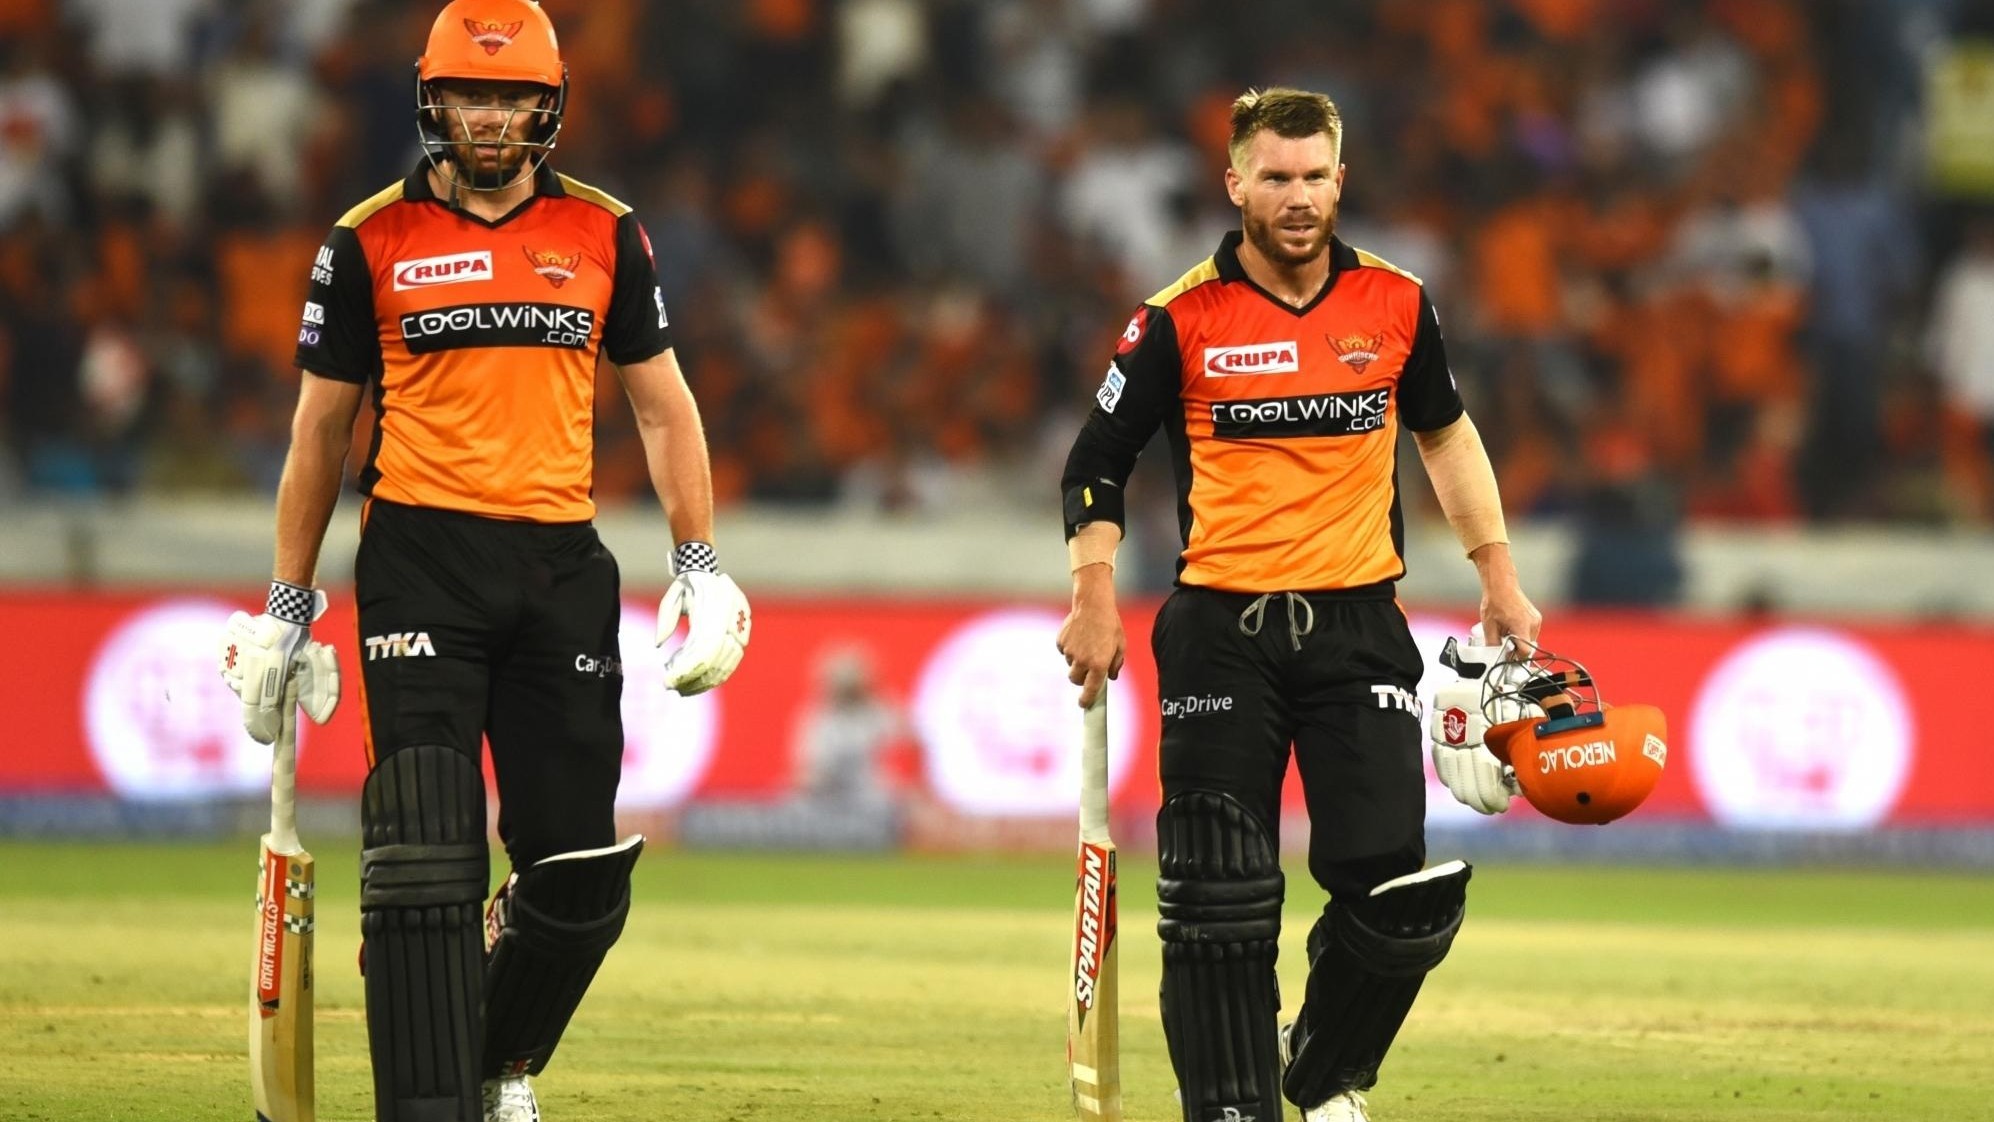 David Warner shares his experience of opening with Jonny Bairstow during IPL 2019